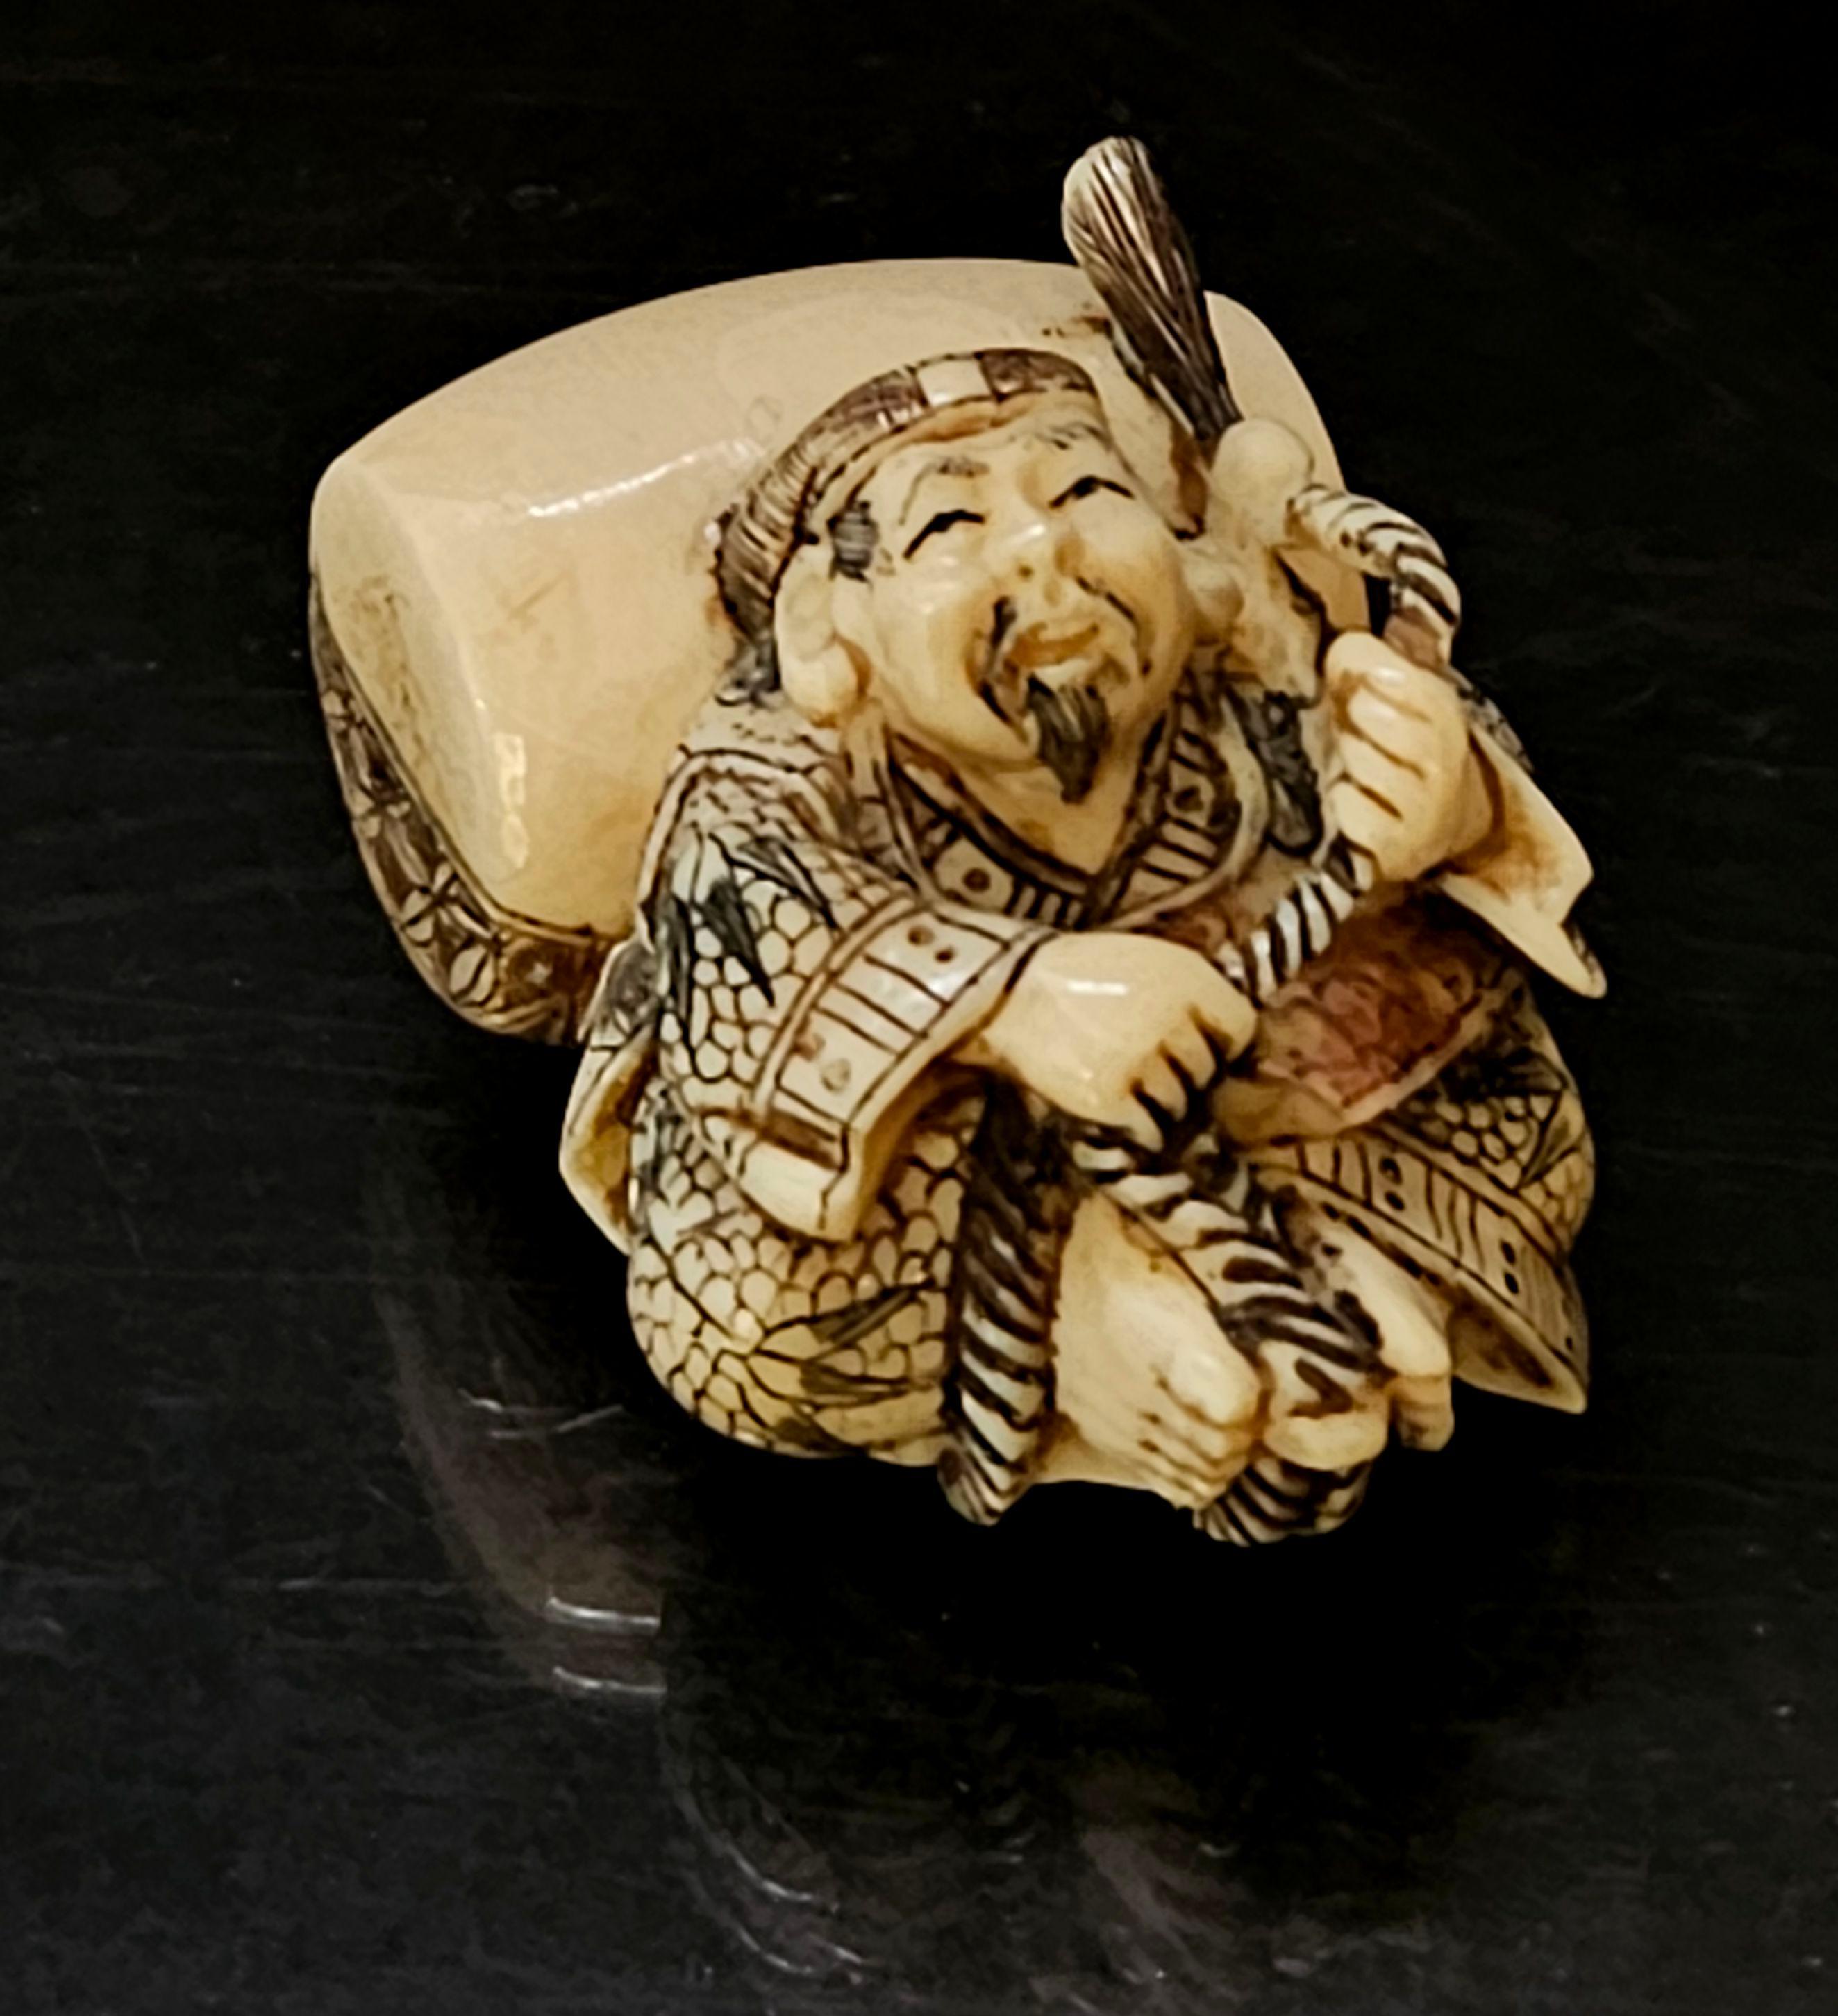 Netsuke Japanese Hand-Carved Polychrome Decorated Figure, Signed by Matsuyoshi, from the Meiji period. Ric.NA003
A truly hand-carved mixed material figure, A Wise Man Holding a Rope, shows a museum quality in detailing, signed by Matsuyoshi. A super